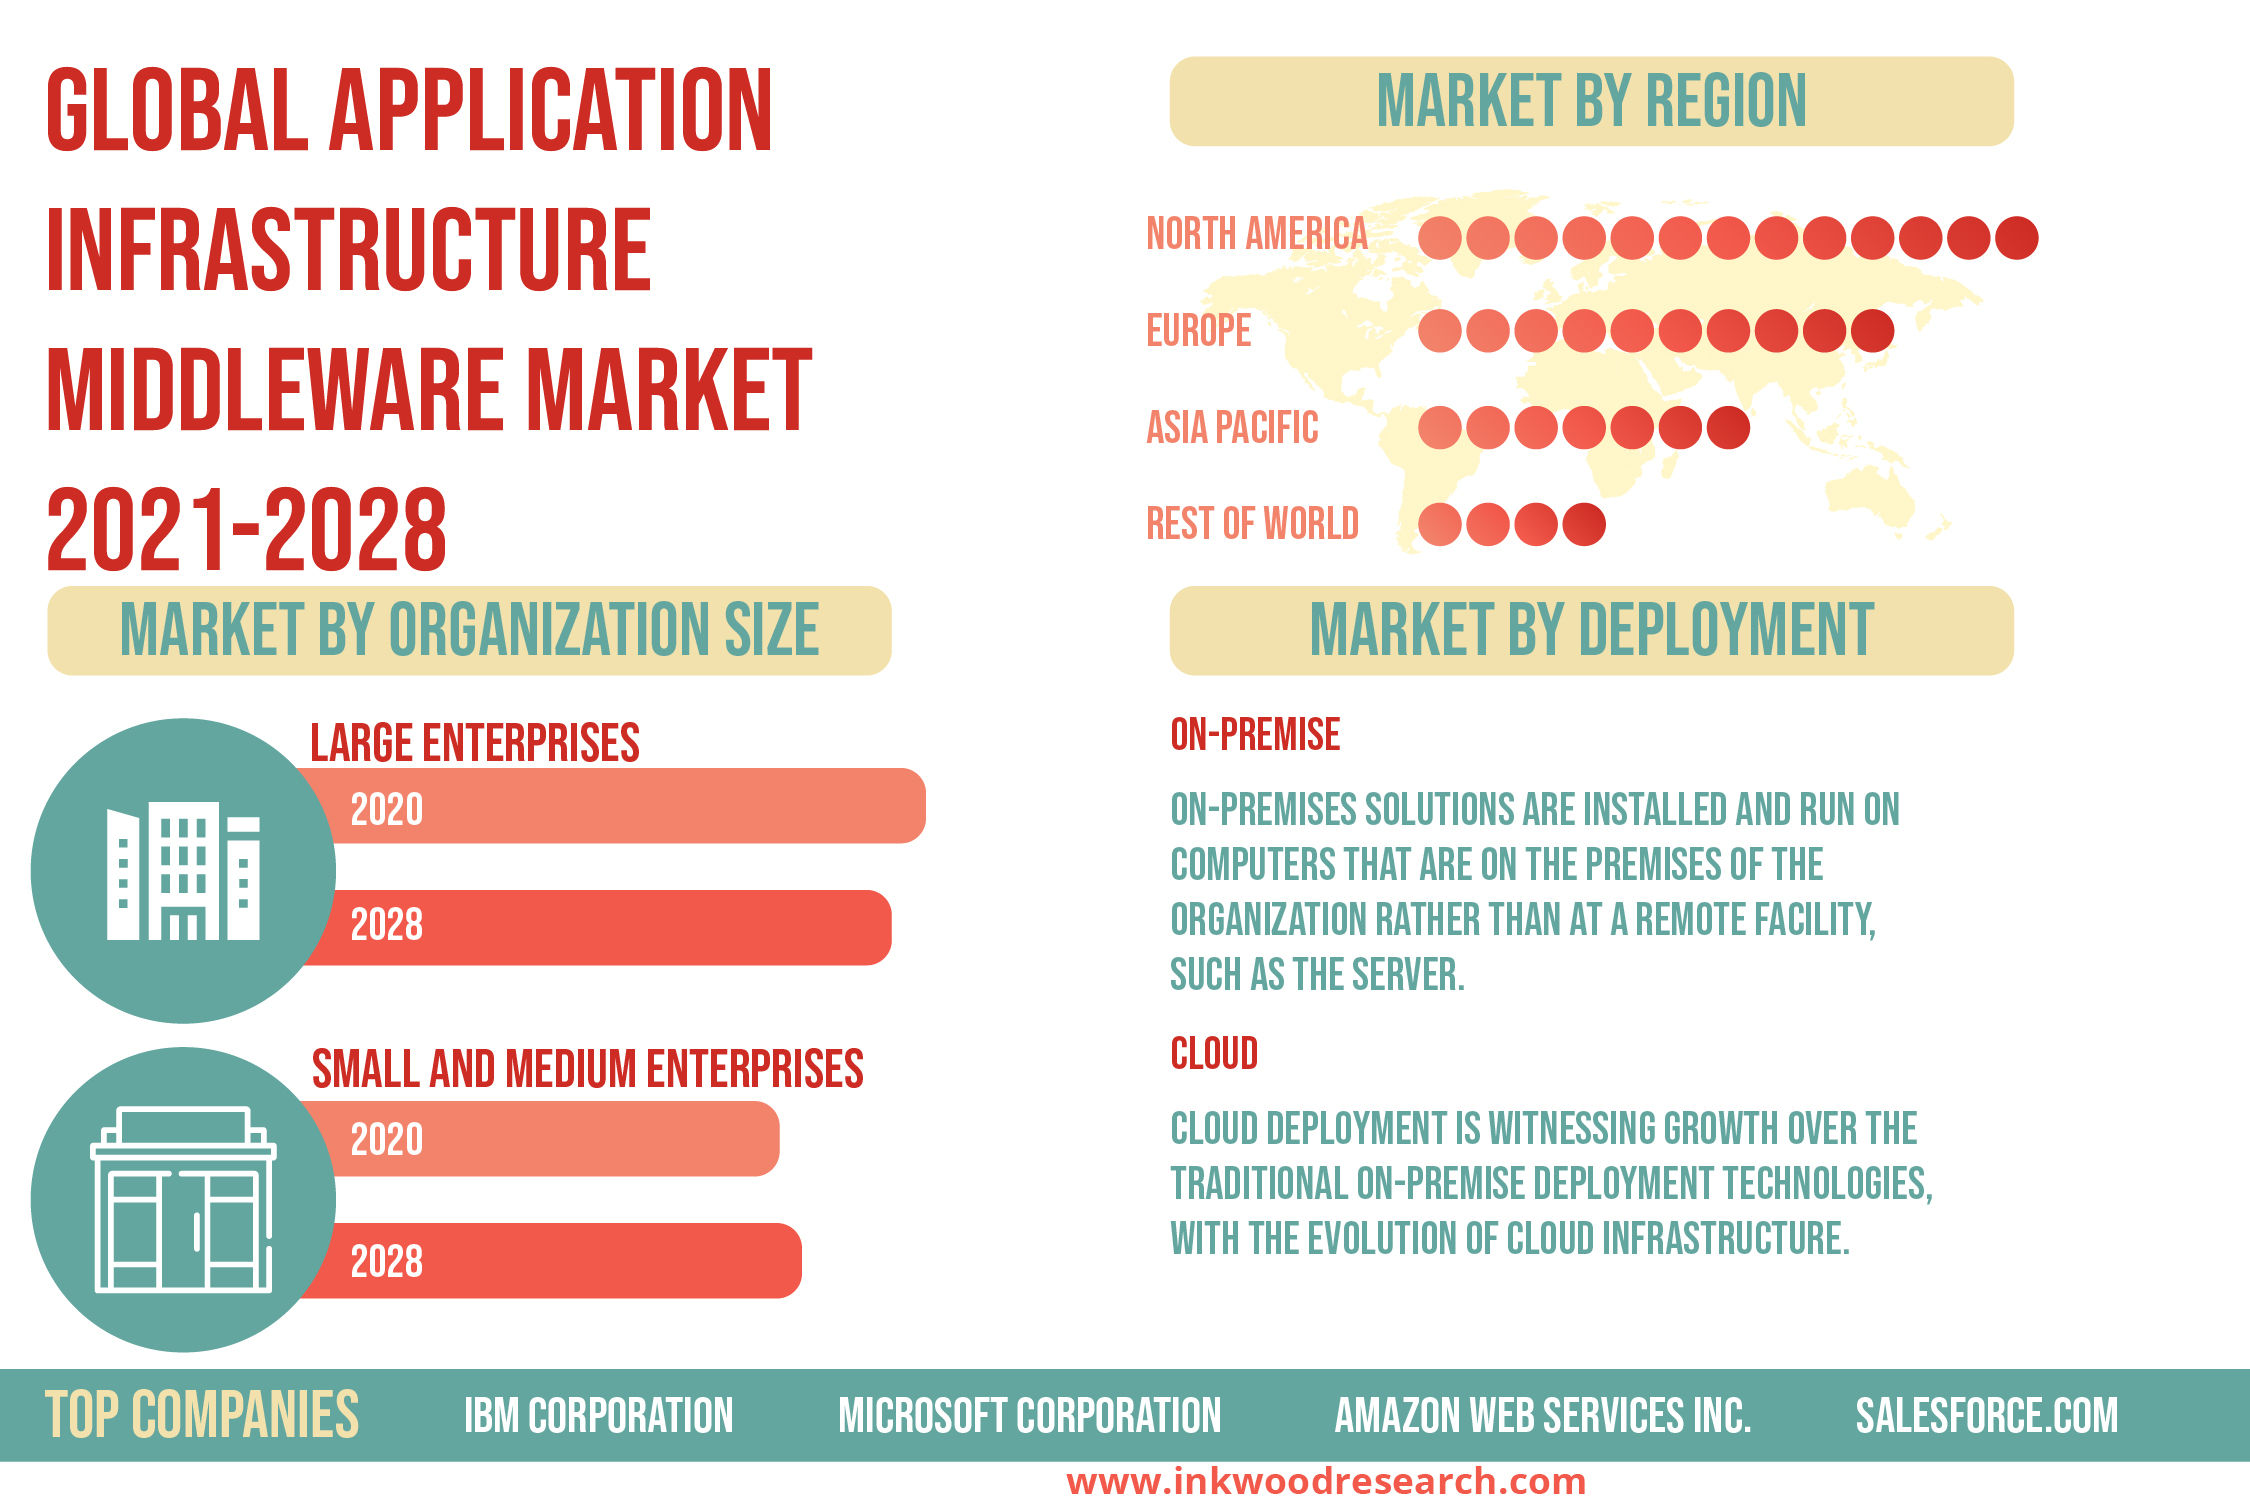 Surge in Cloud Services to fuel the Global Application Infrastructure Middleware Market 